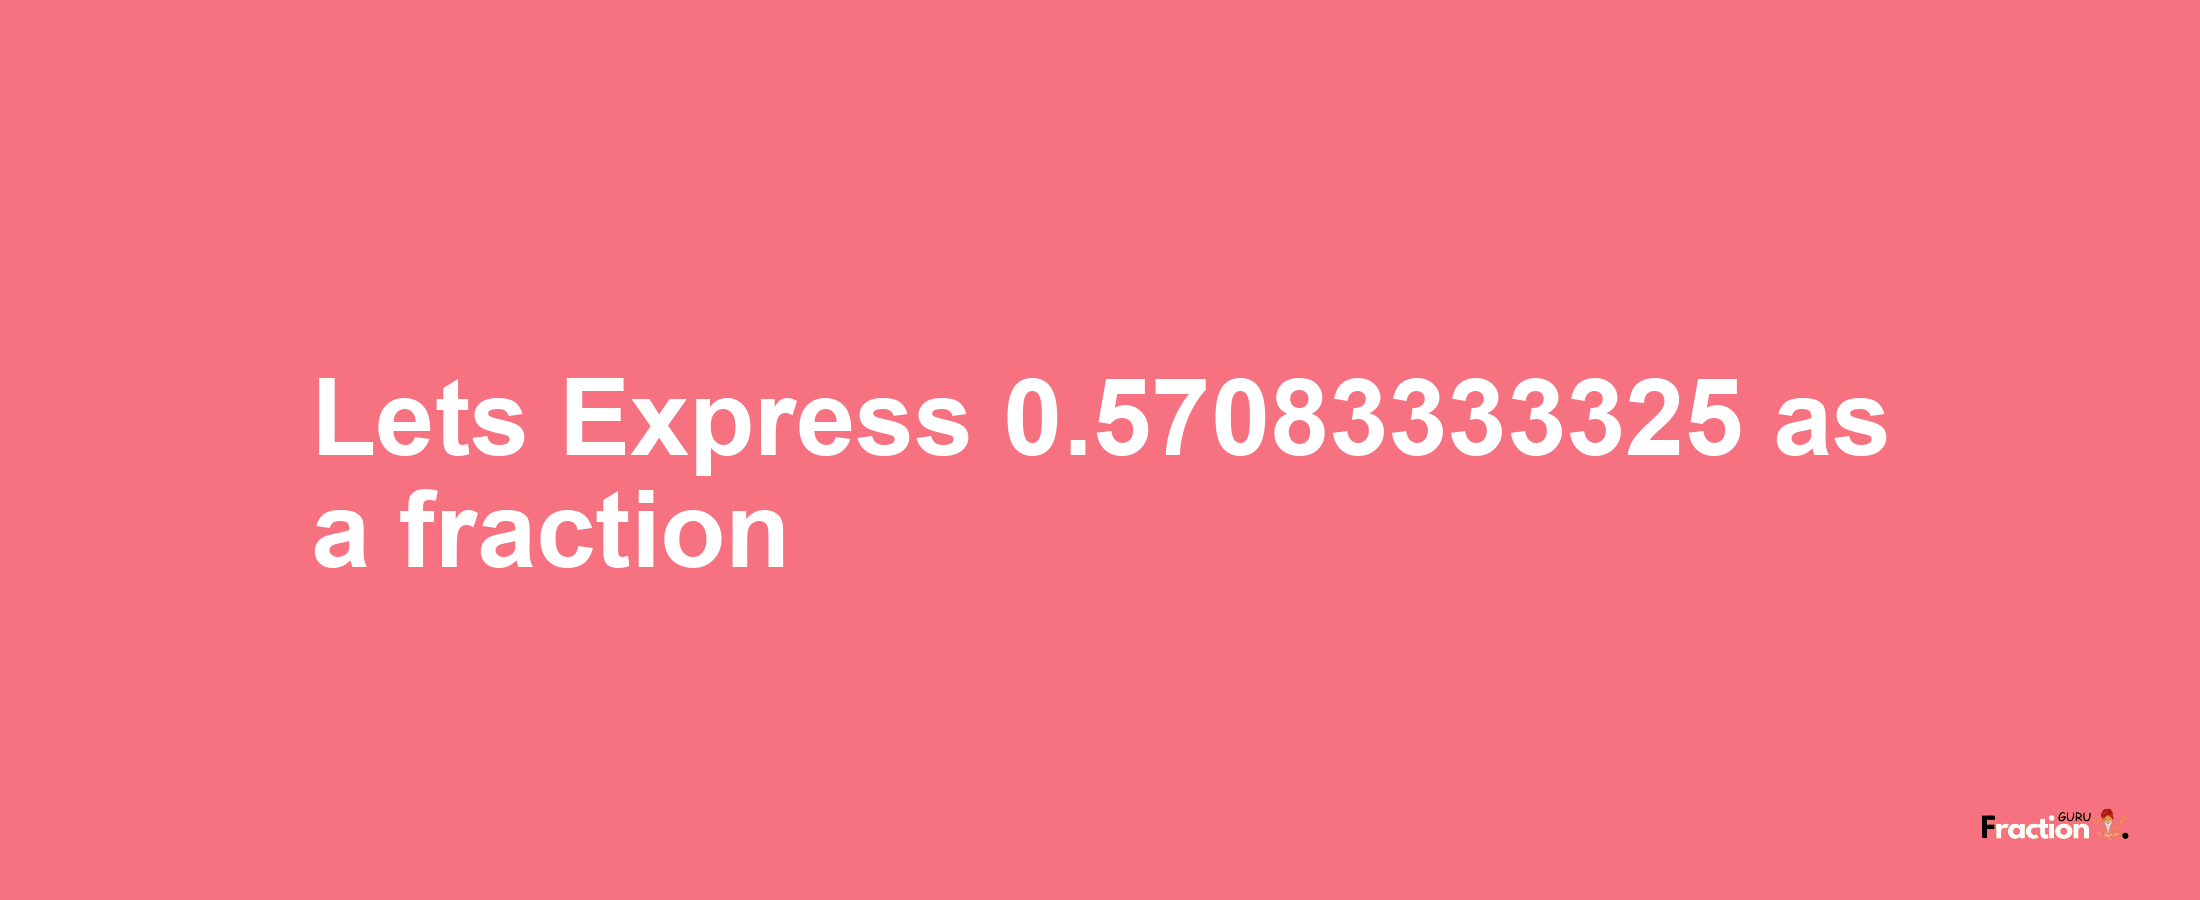 Lets Express 0.57083333325 as afraction